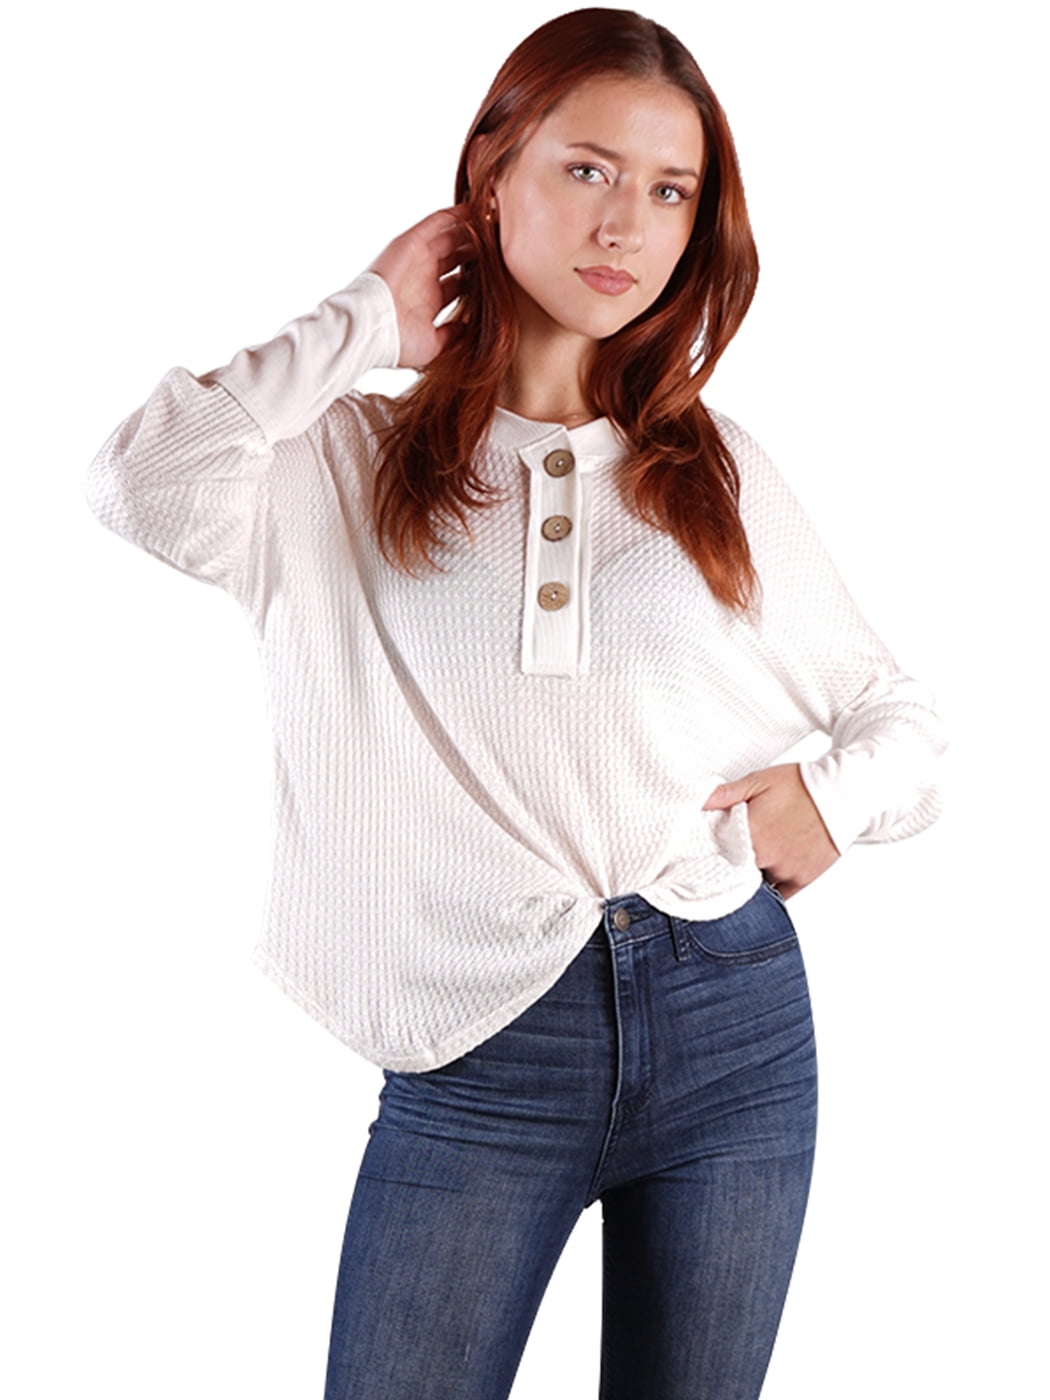 Women's Waffle Knit Tunic Tops Loose Long Sleeve Button Up V Neck ...